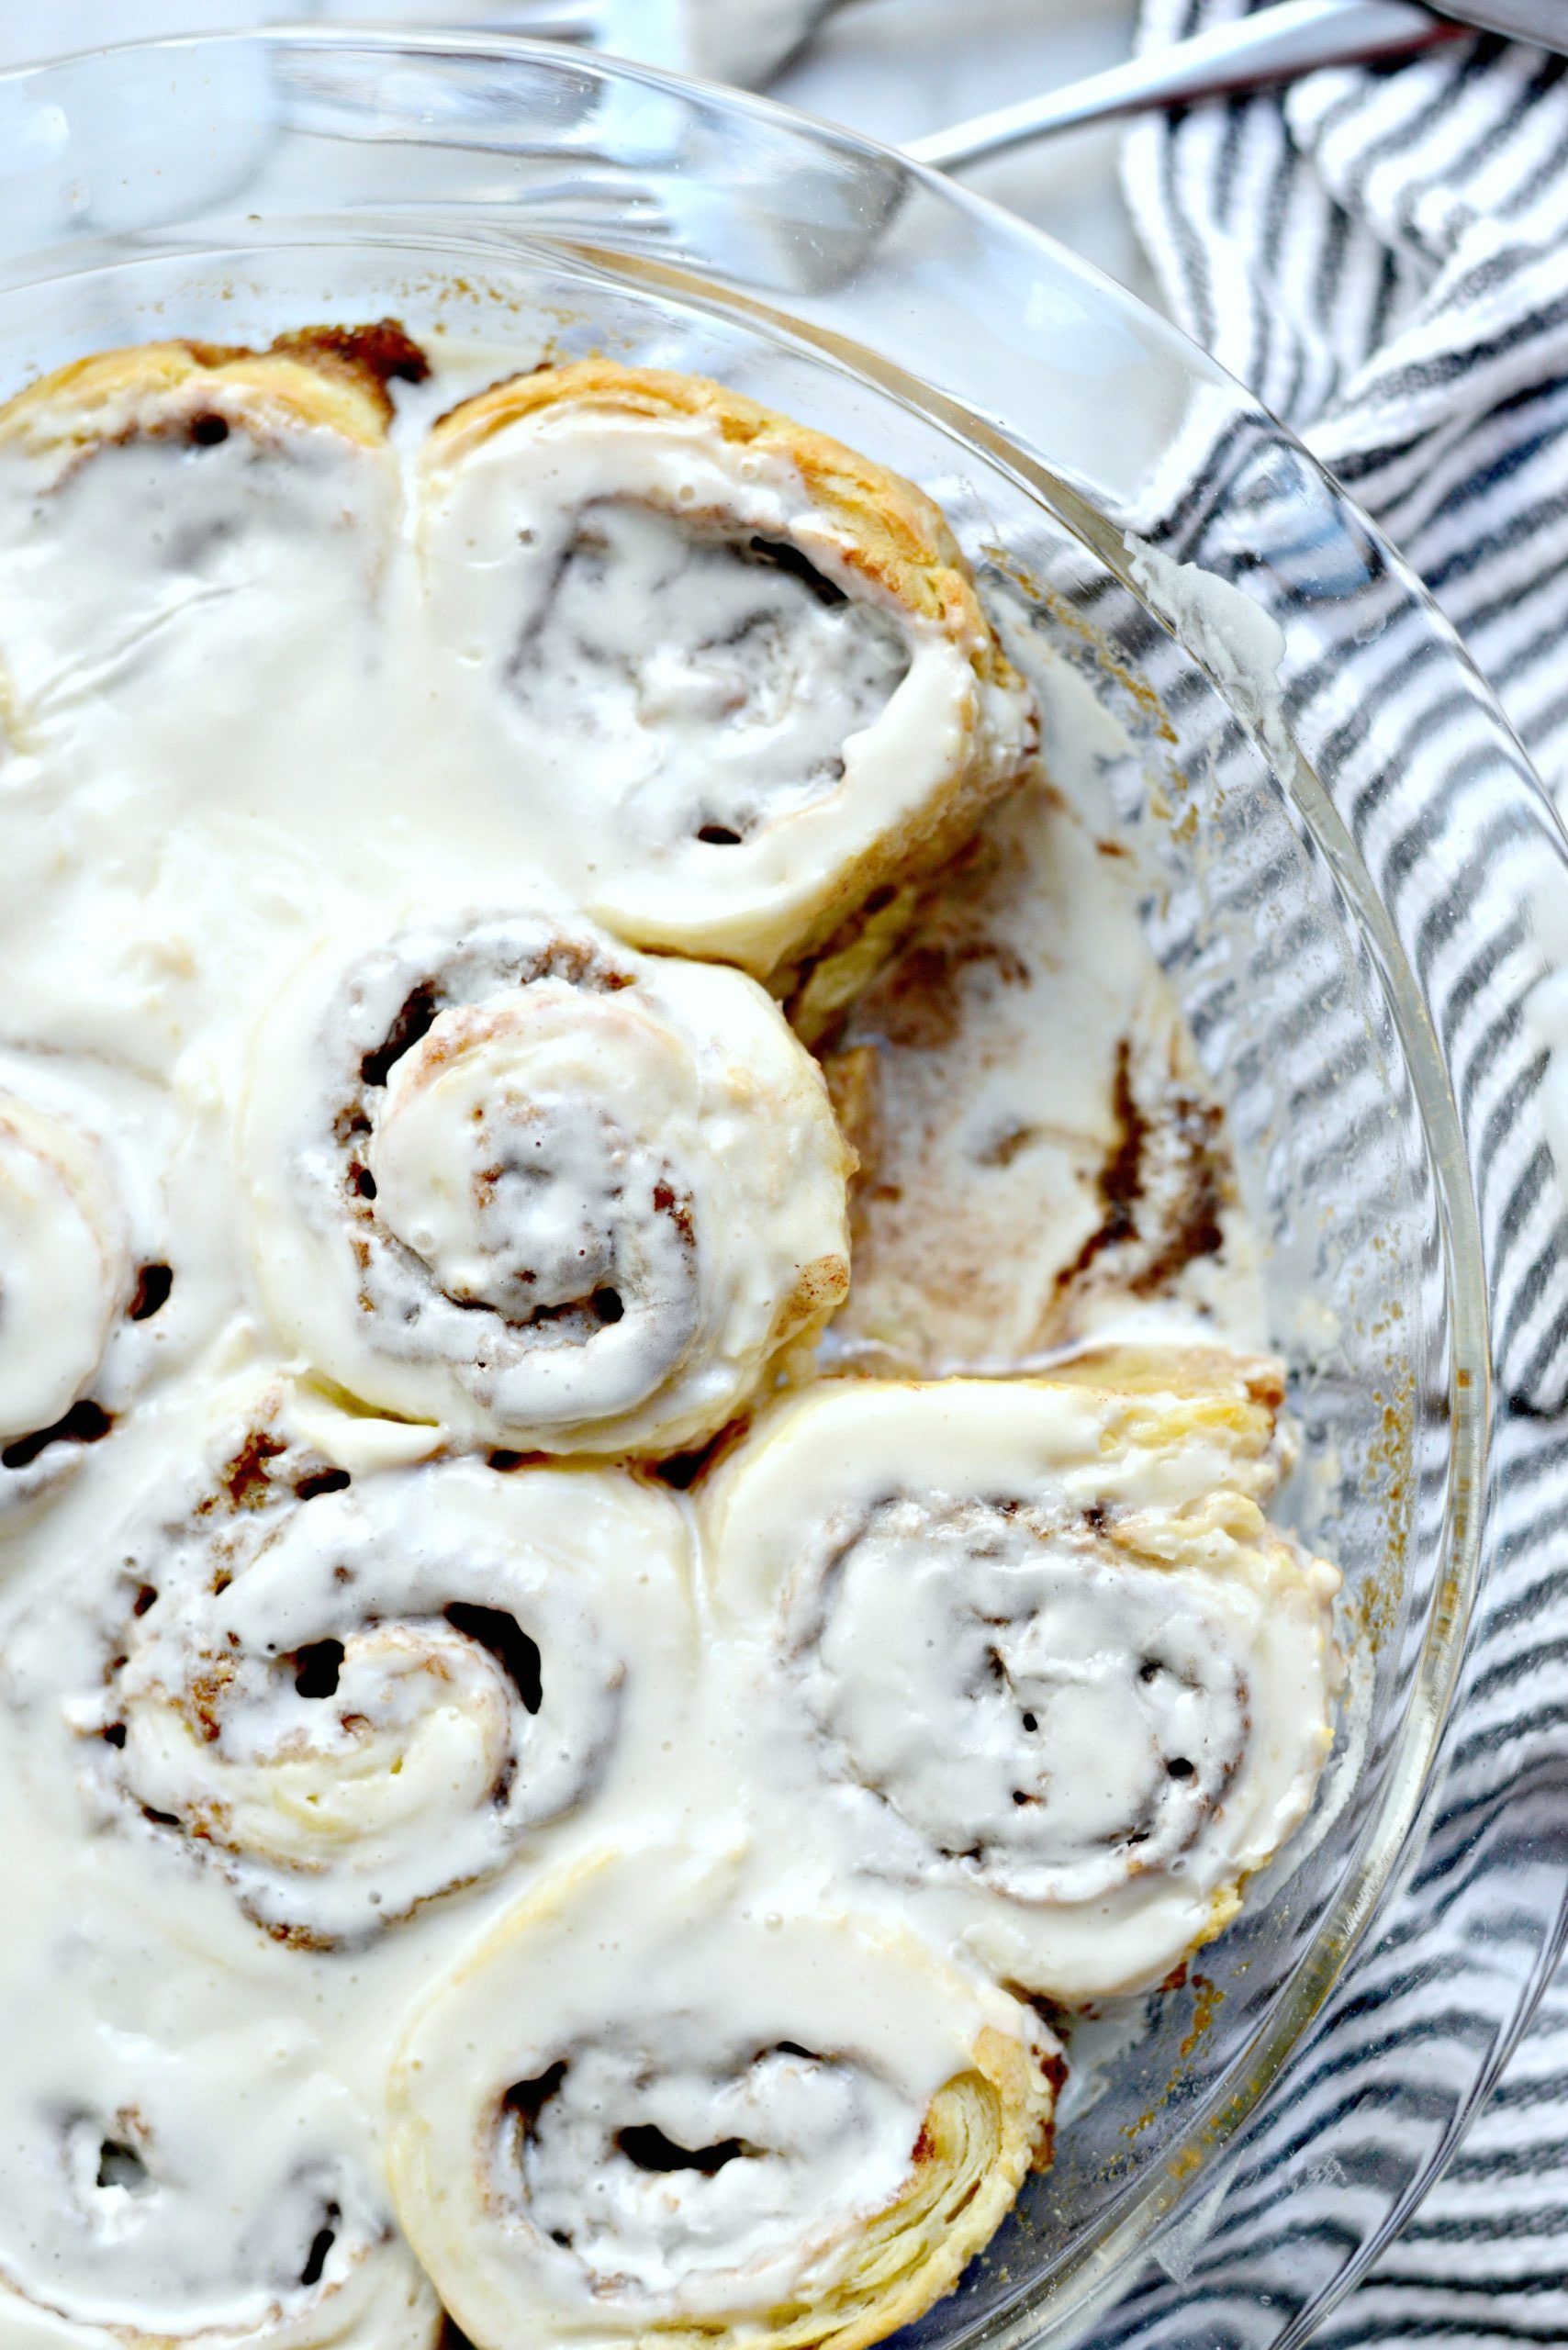 Homemade Cinnamon Roll Recipe - Spend With Pennies